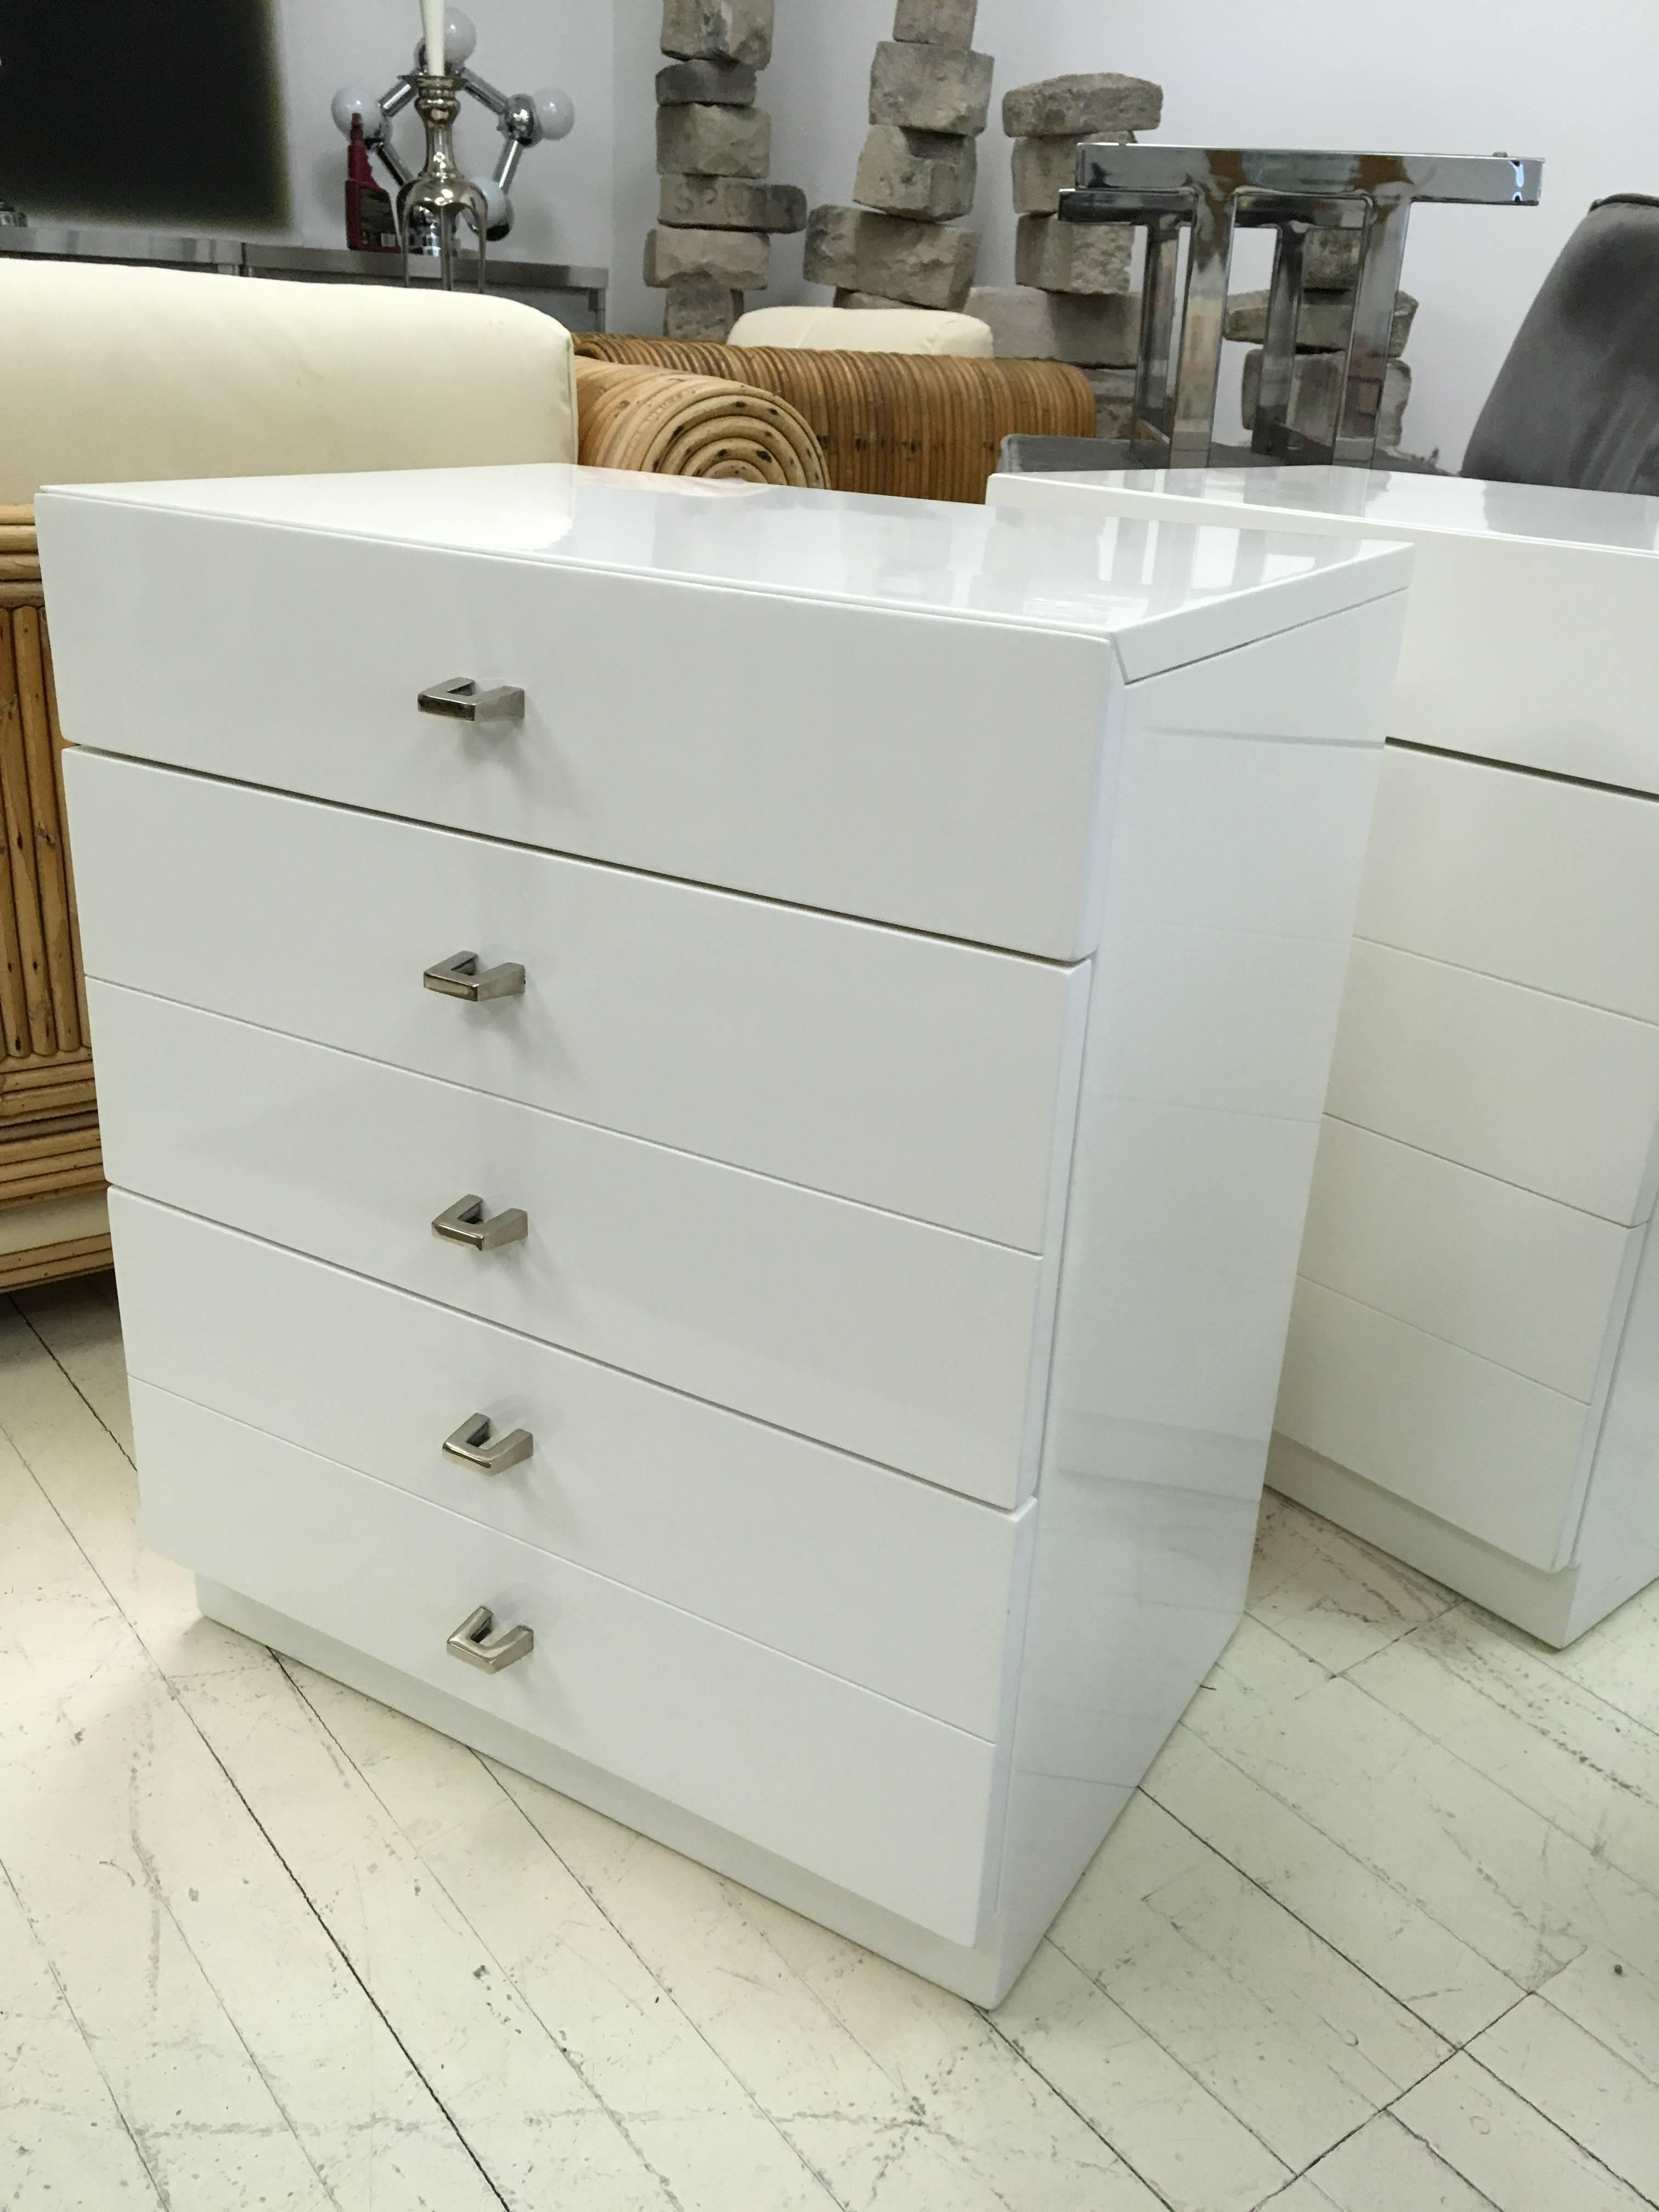 Pair of 3 drawer nightstands by Milo Baughman,
with nickel original pulls and fresh coat of high gloss lacquer.